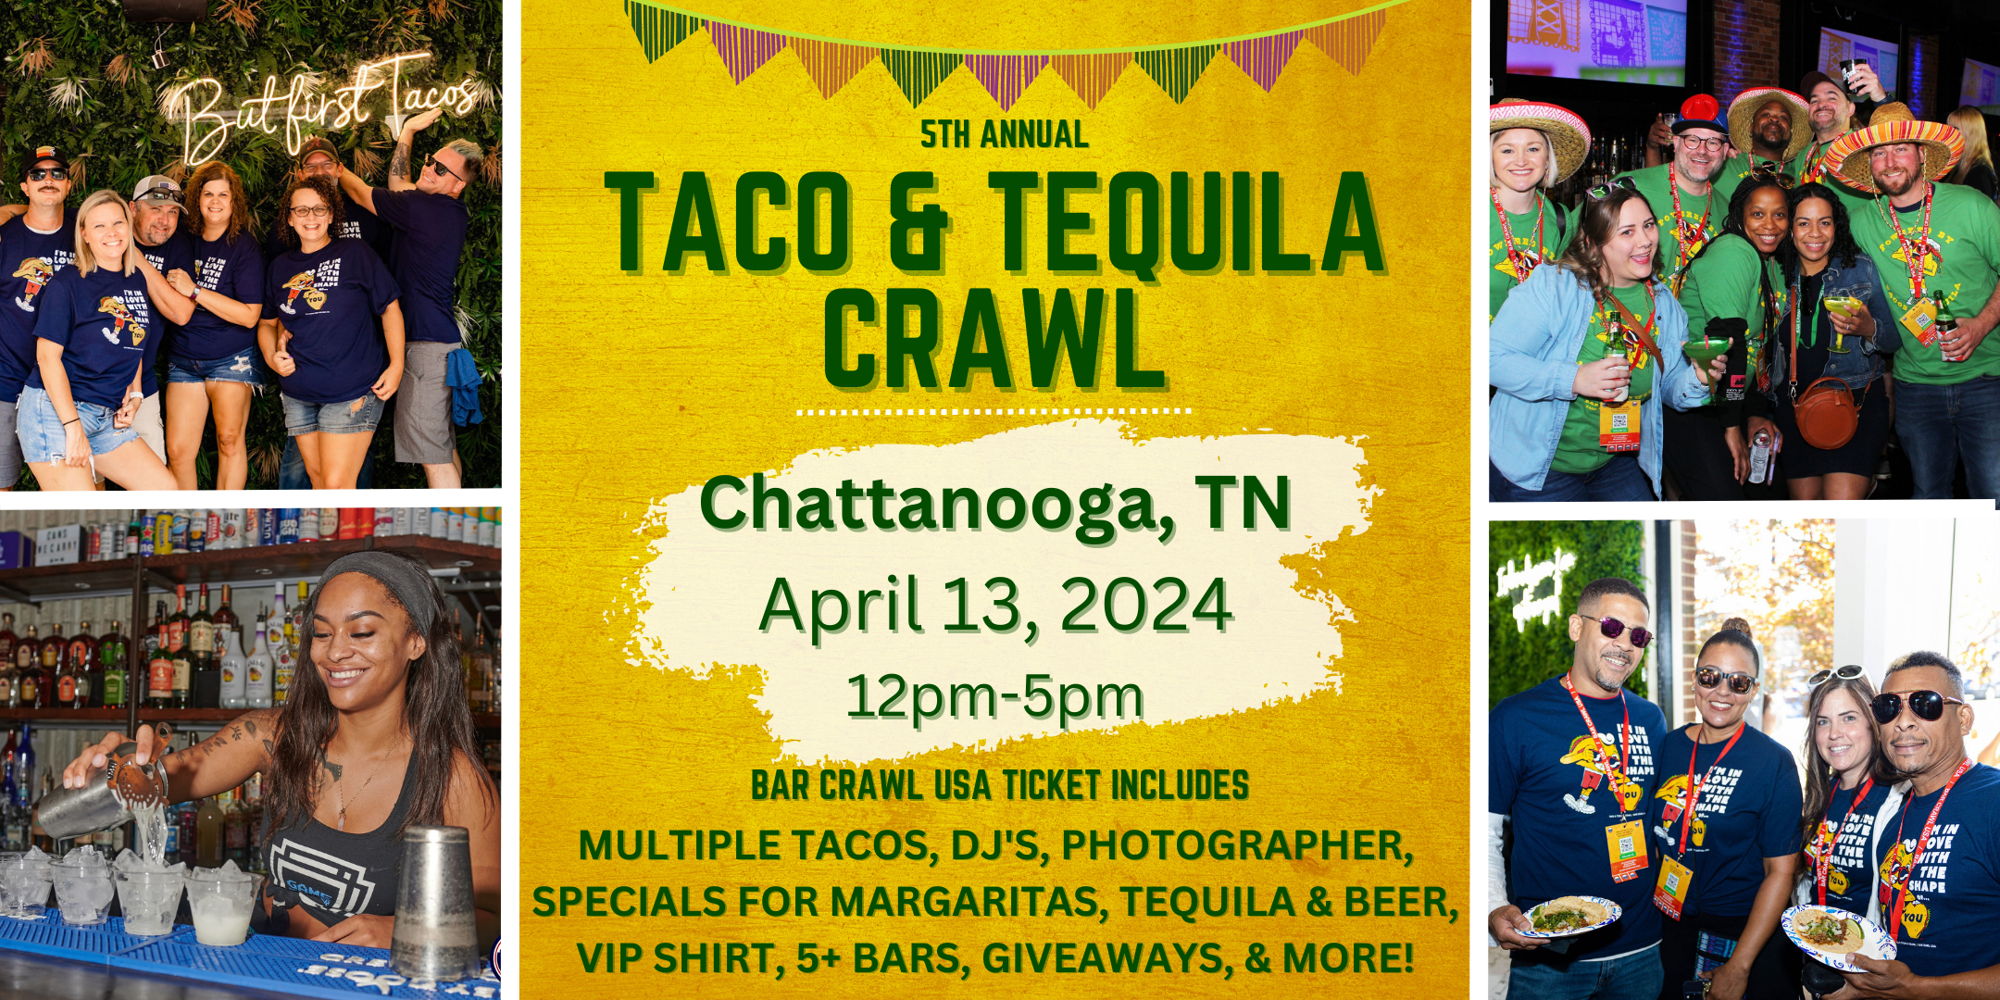 Chattanooga Taco & Tequila Bar Crawl: 5th Annual promotional image